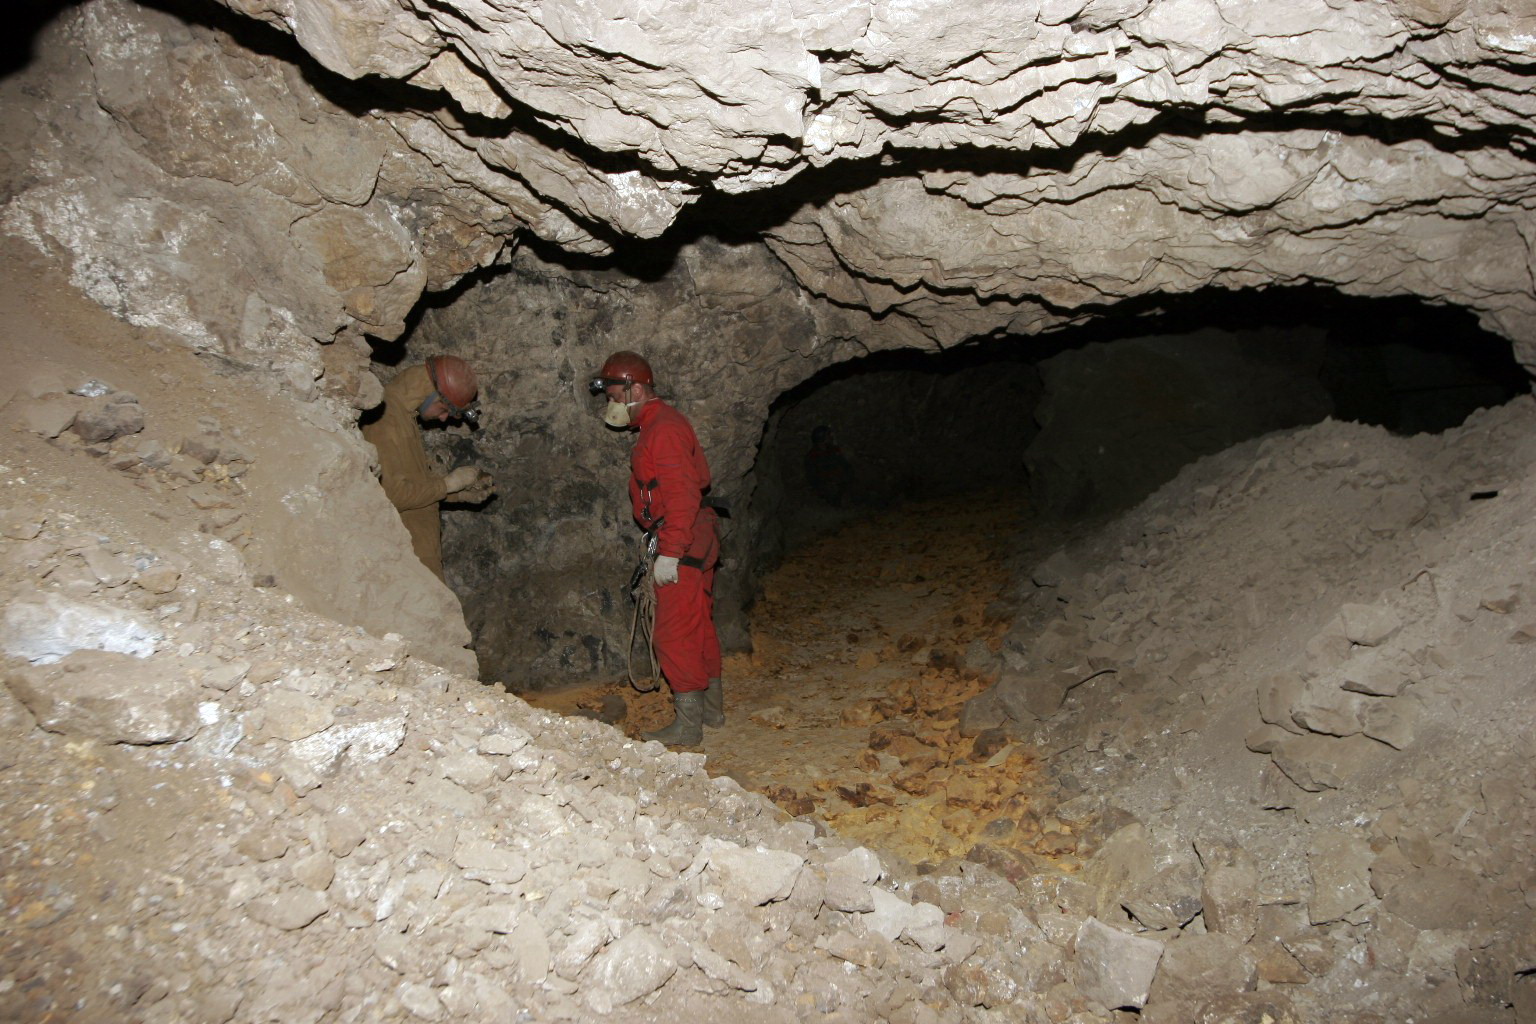 Speleological expedition under the auspices of UNESCO